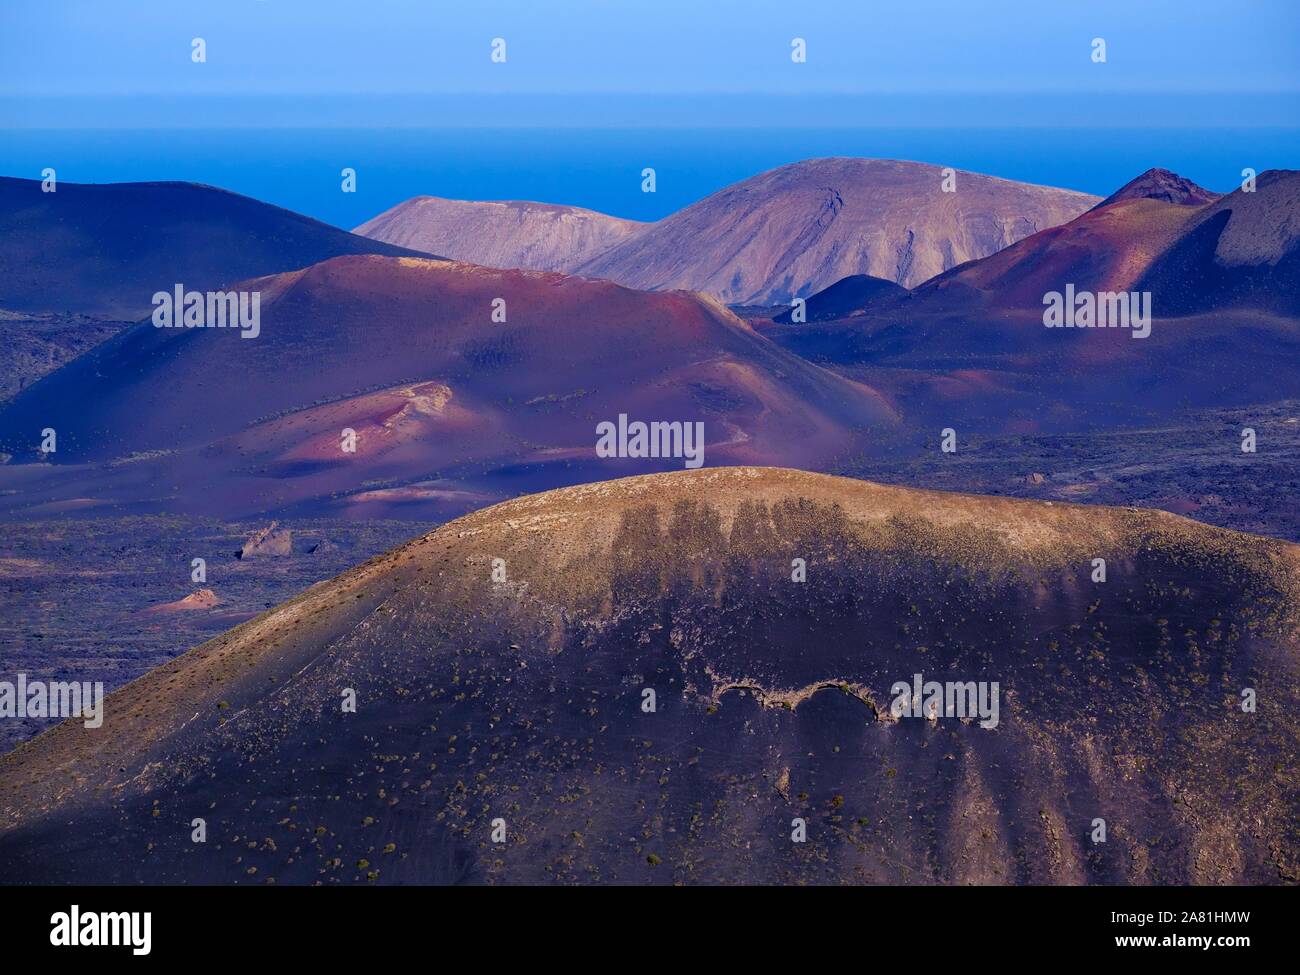 Fire mountains in Timanfaya National Park, view from Montana de Guardilama, Lanzarote, Canary Islands, Spain Stock Photo